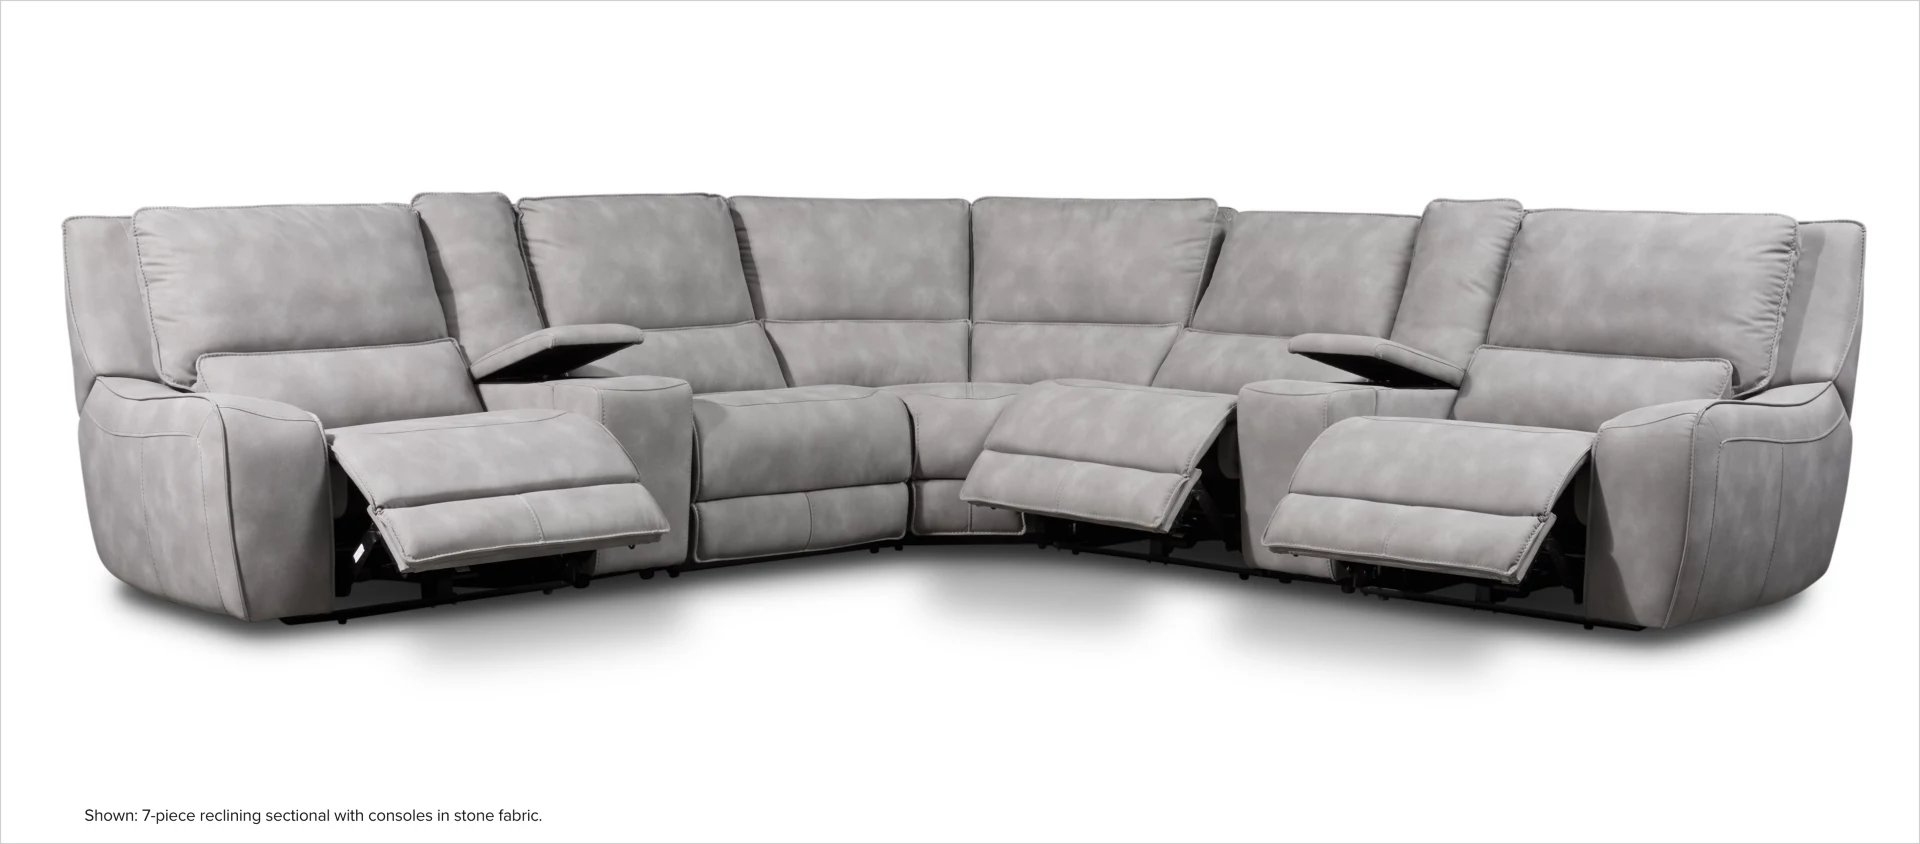 Holden 7-piece reclining sectional with consoles in stone fabric.